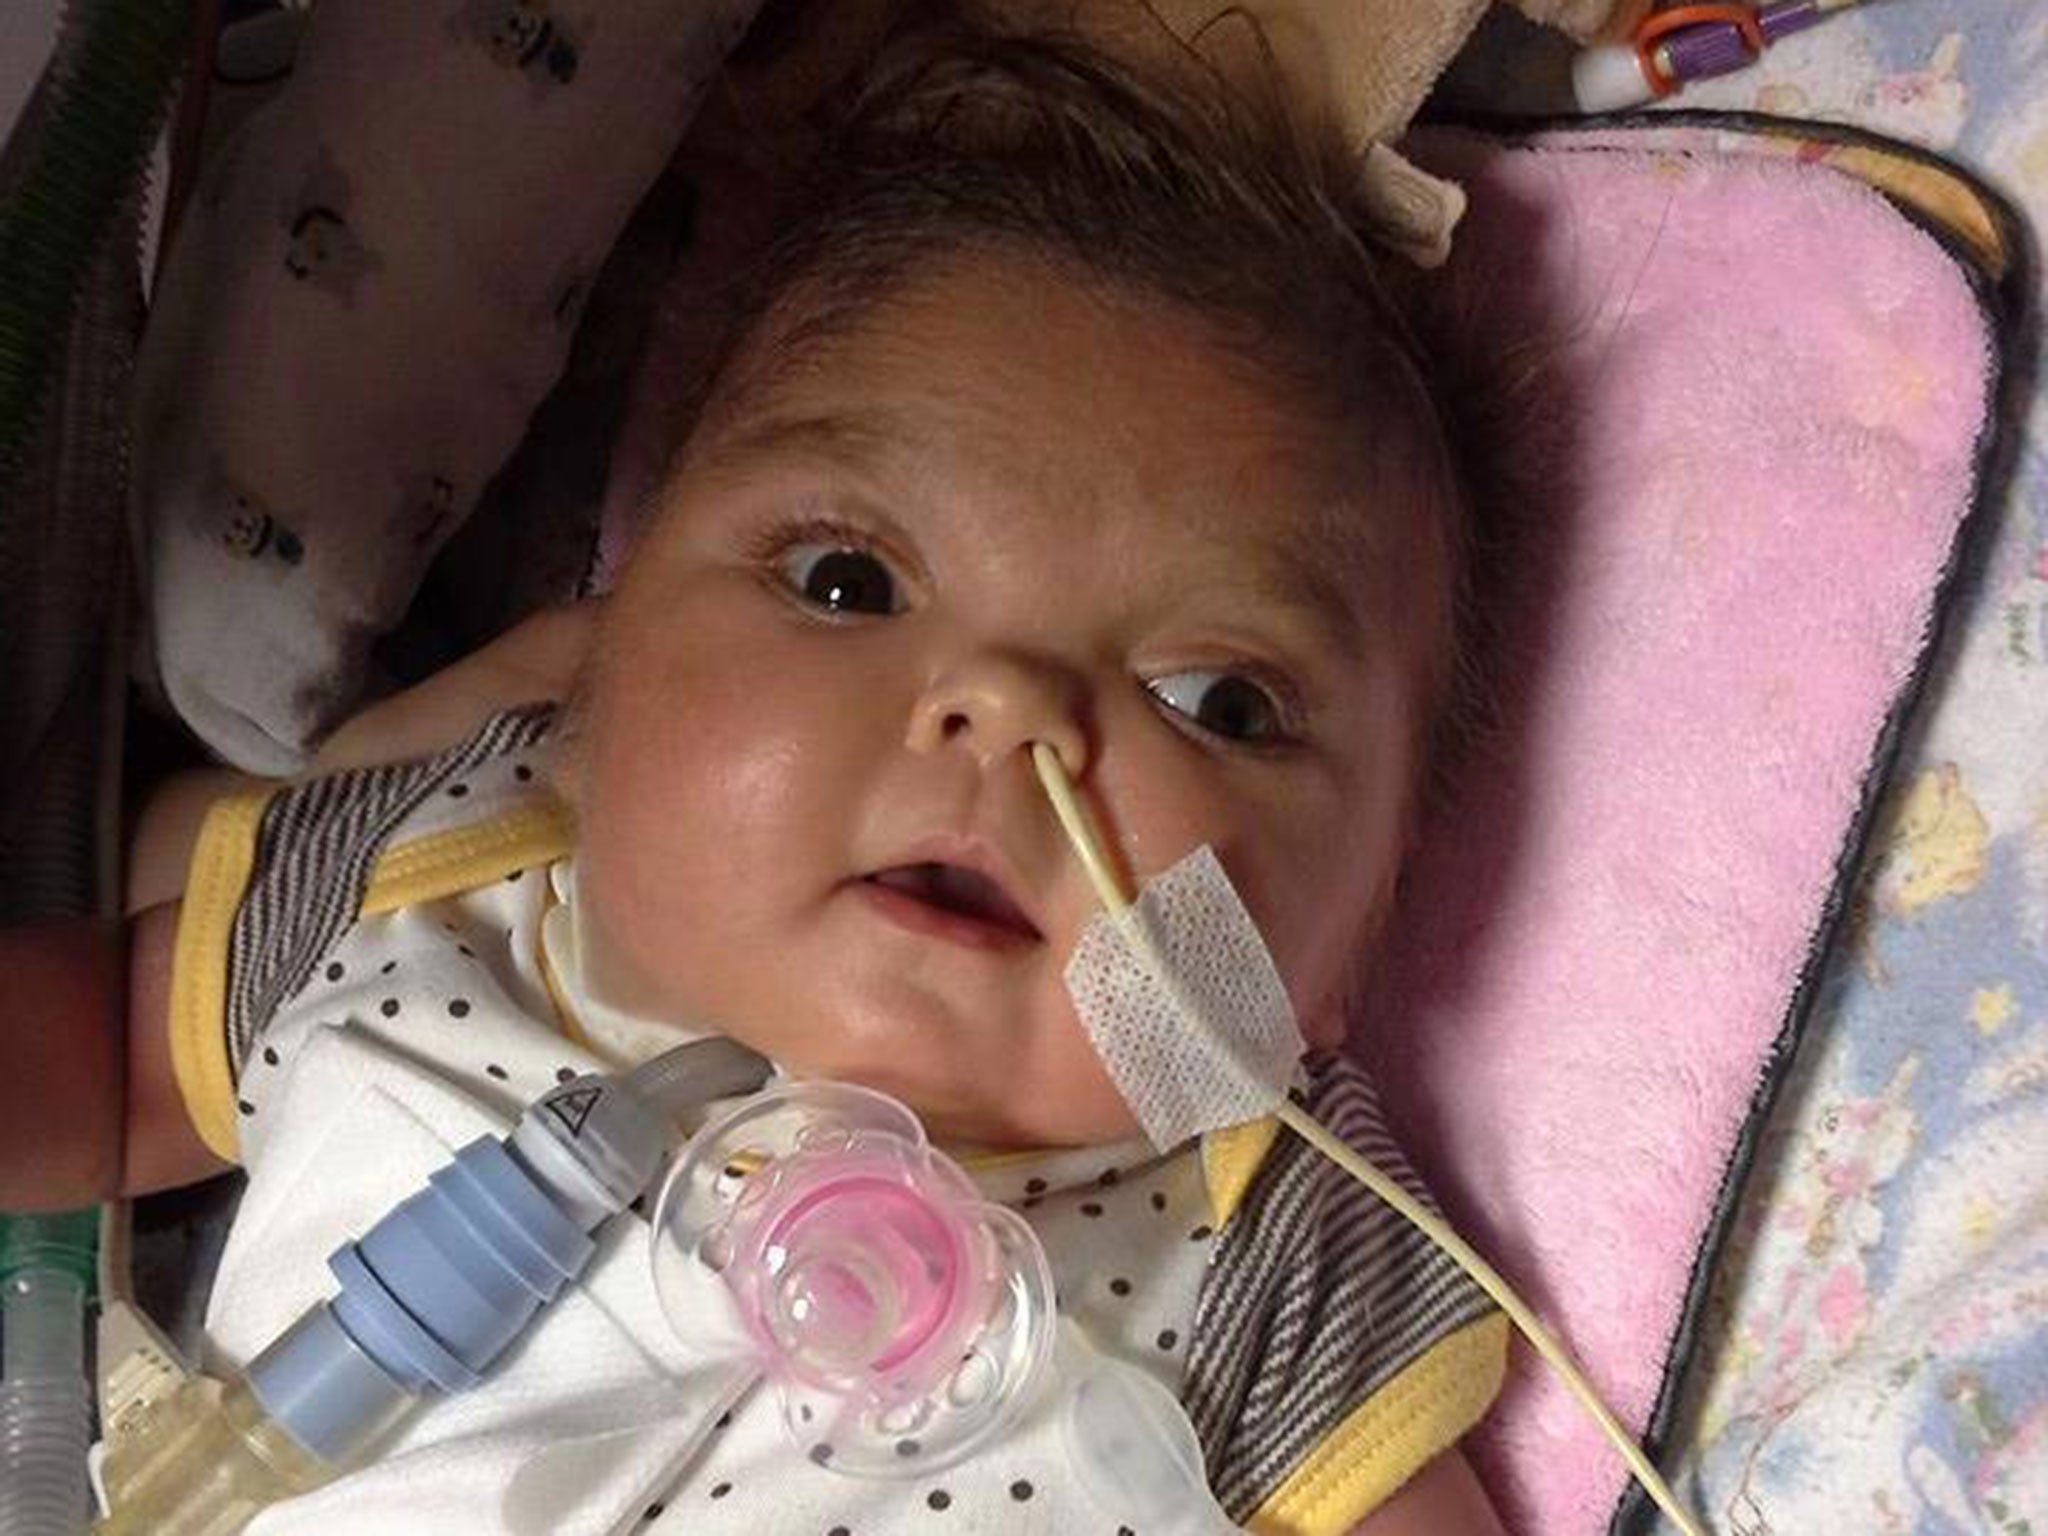 Olivia Stanca, one, died after her parents agreed to withdraw her life support at Great Ormond Street Hospital